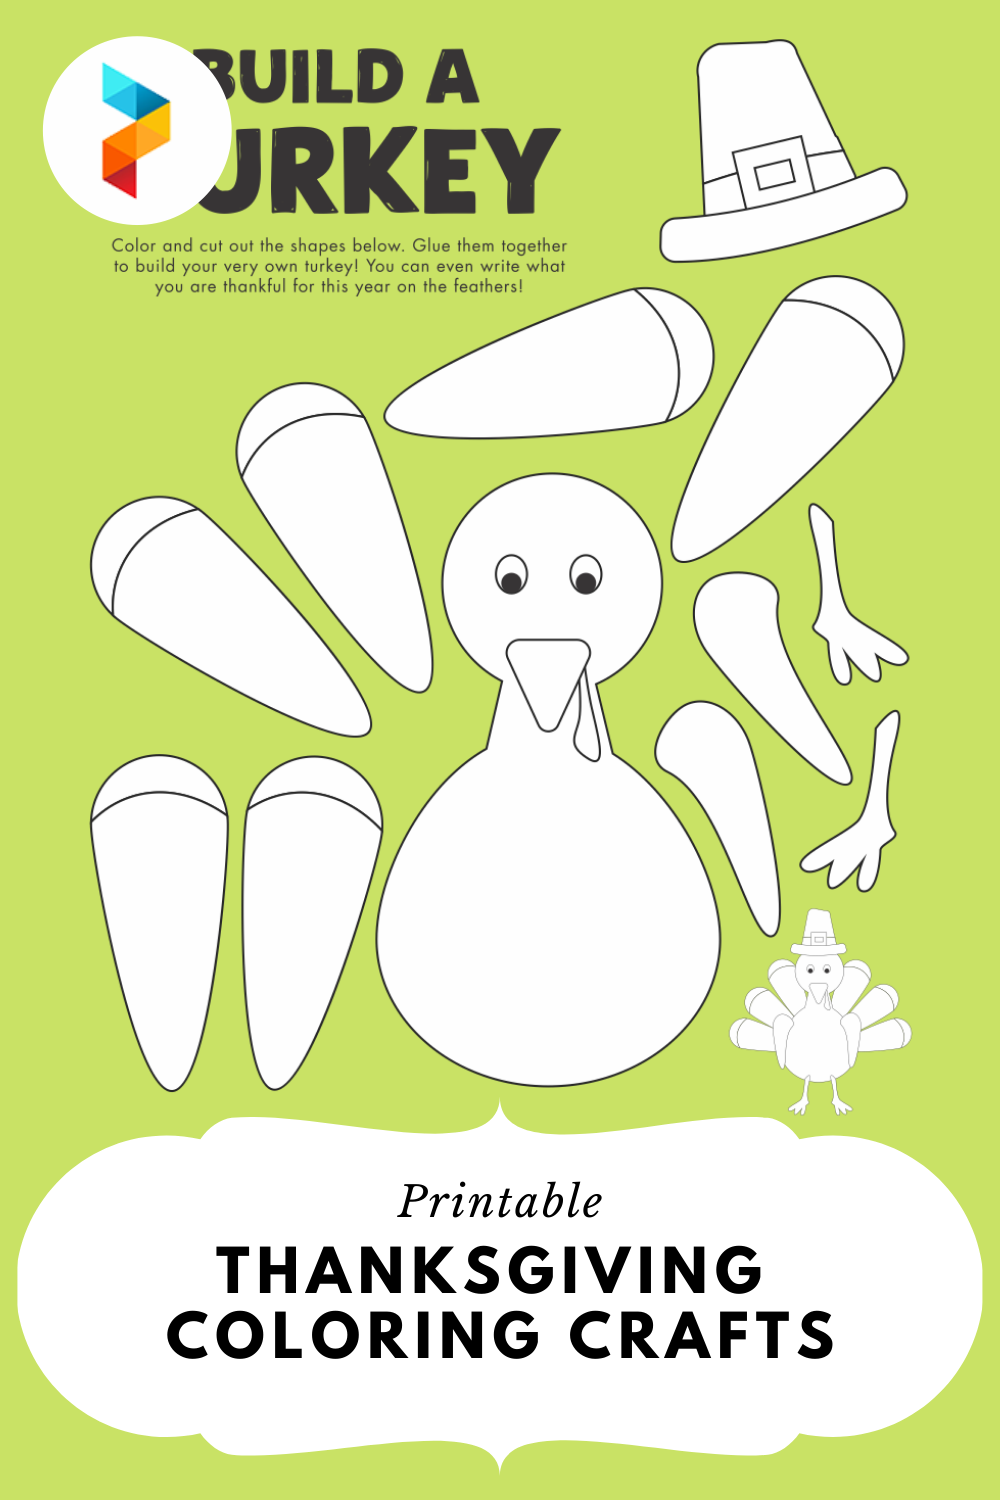 Printable Thanksgiving Coloring Crafts